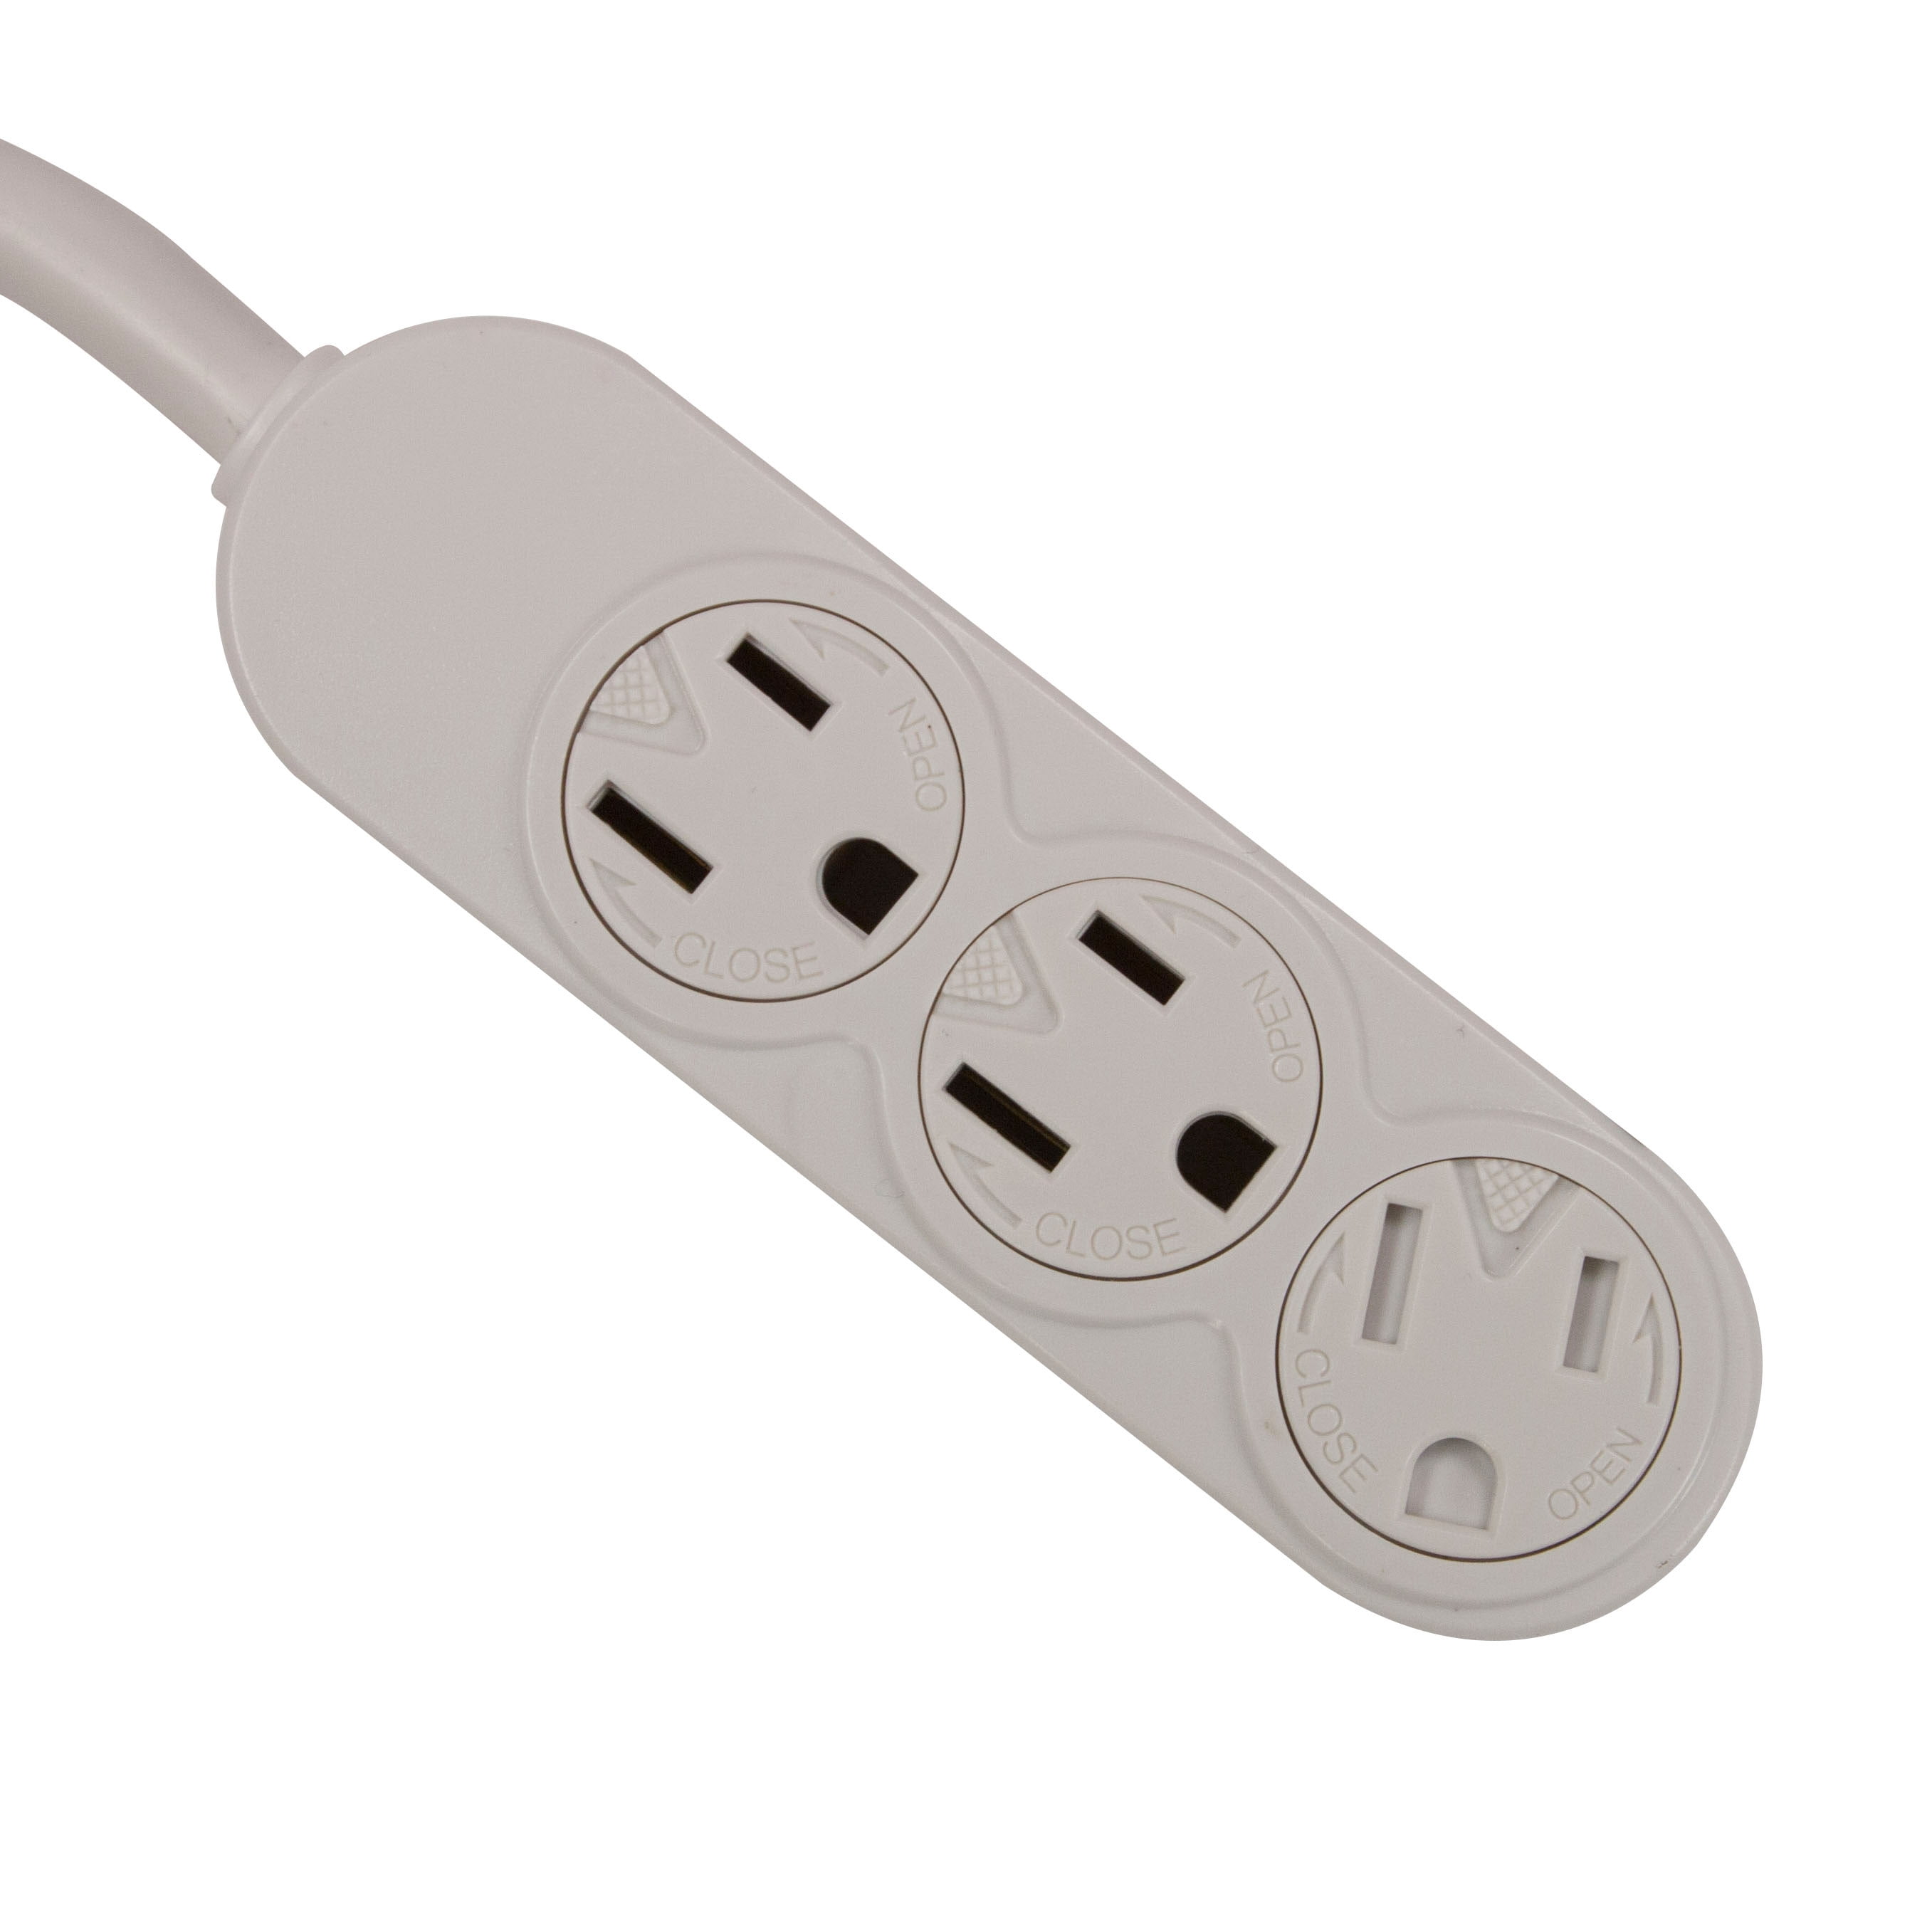 Master Electrician PS-304 White Mini 3 Outlet Power Strip w Rotate Covers 48 